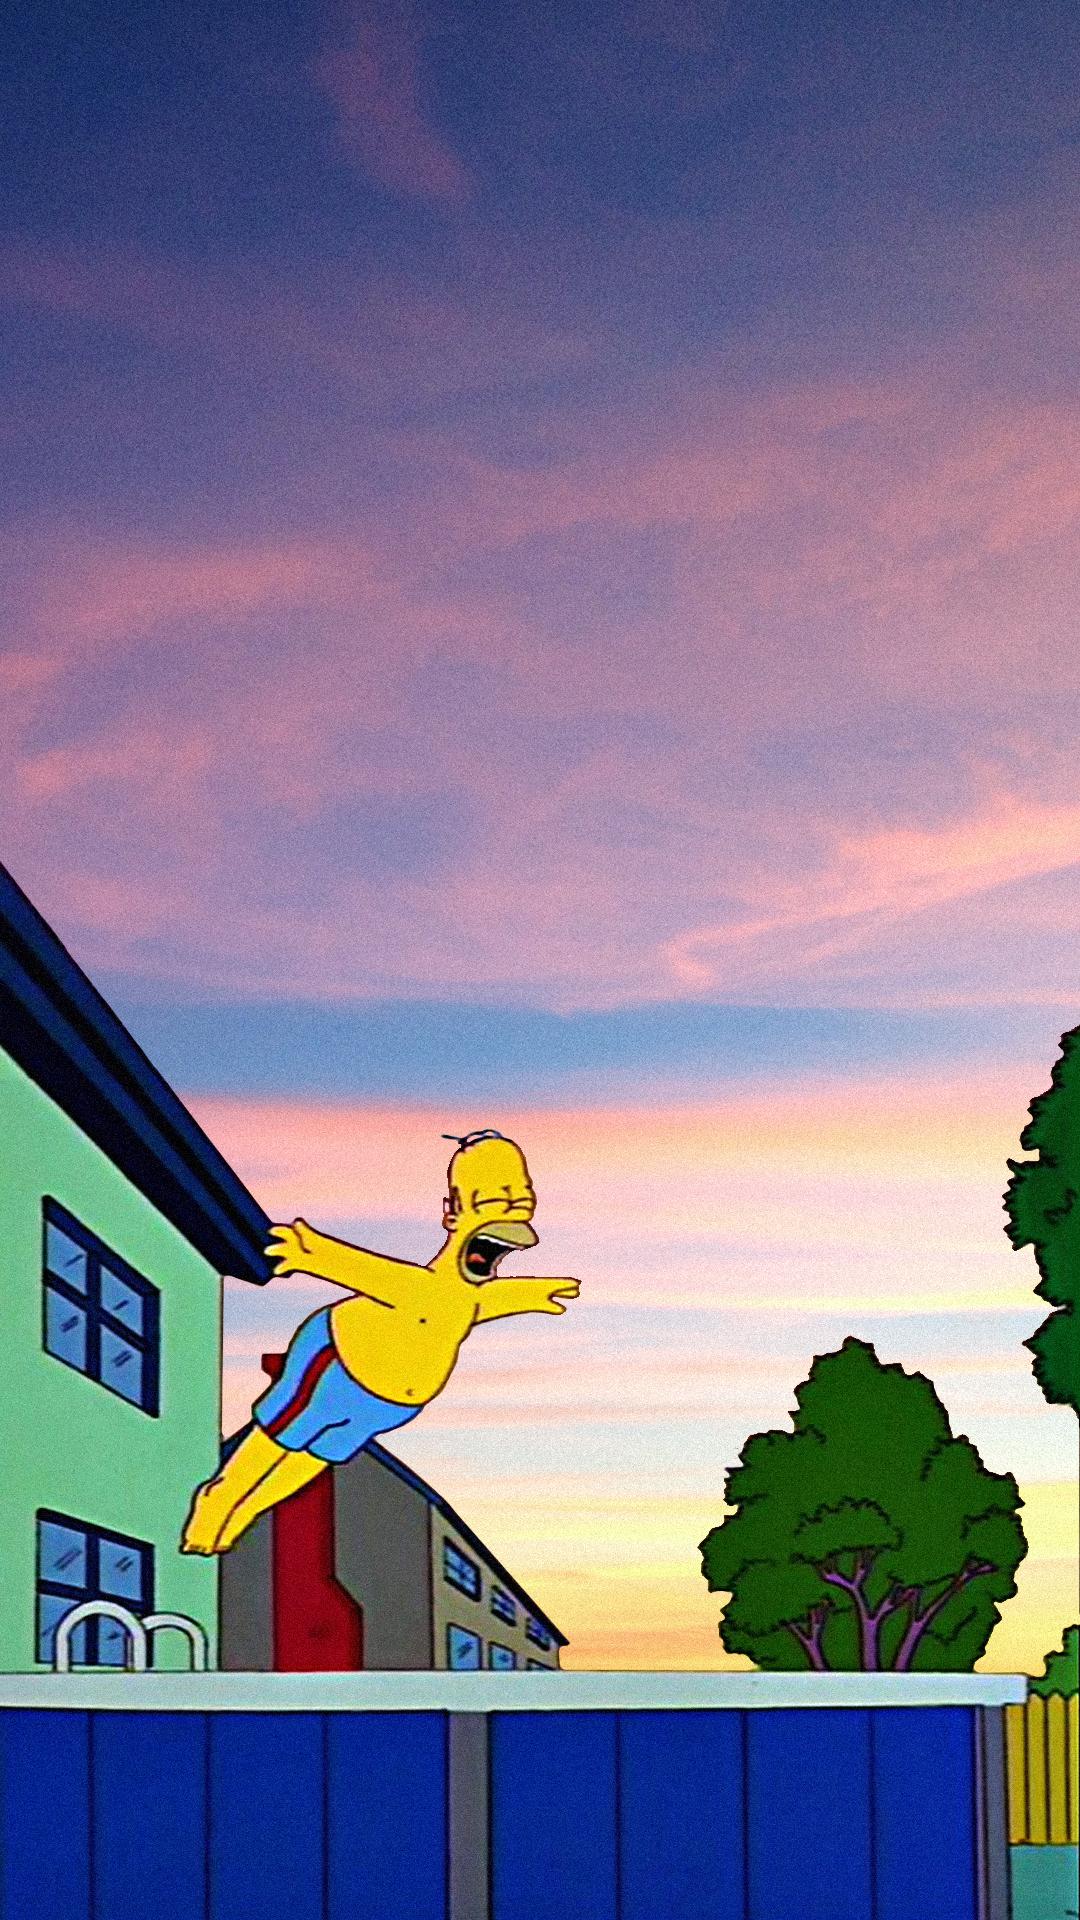 Homer Simpson jumping over the fence wallpaper 1080x1920 - Homer Simpson